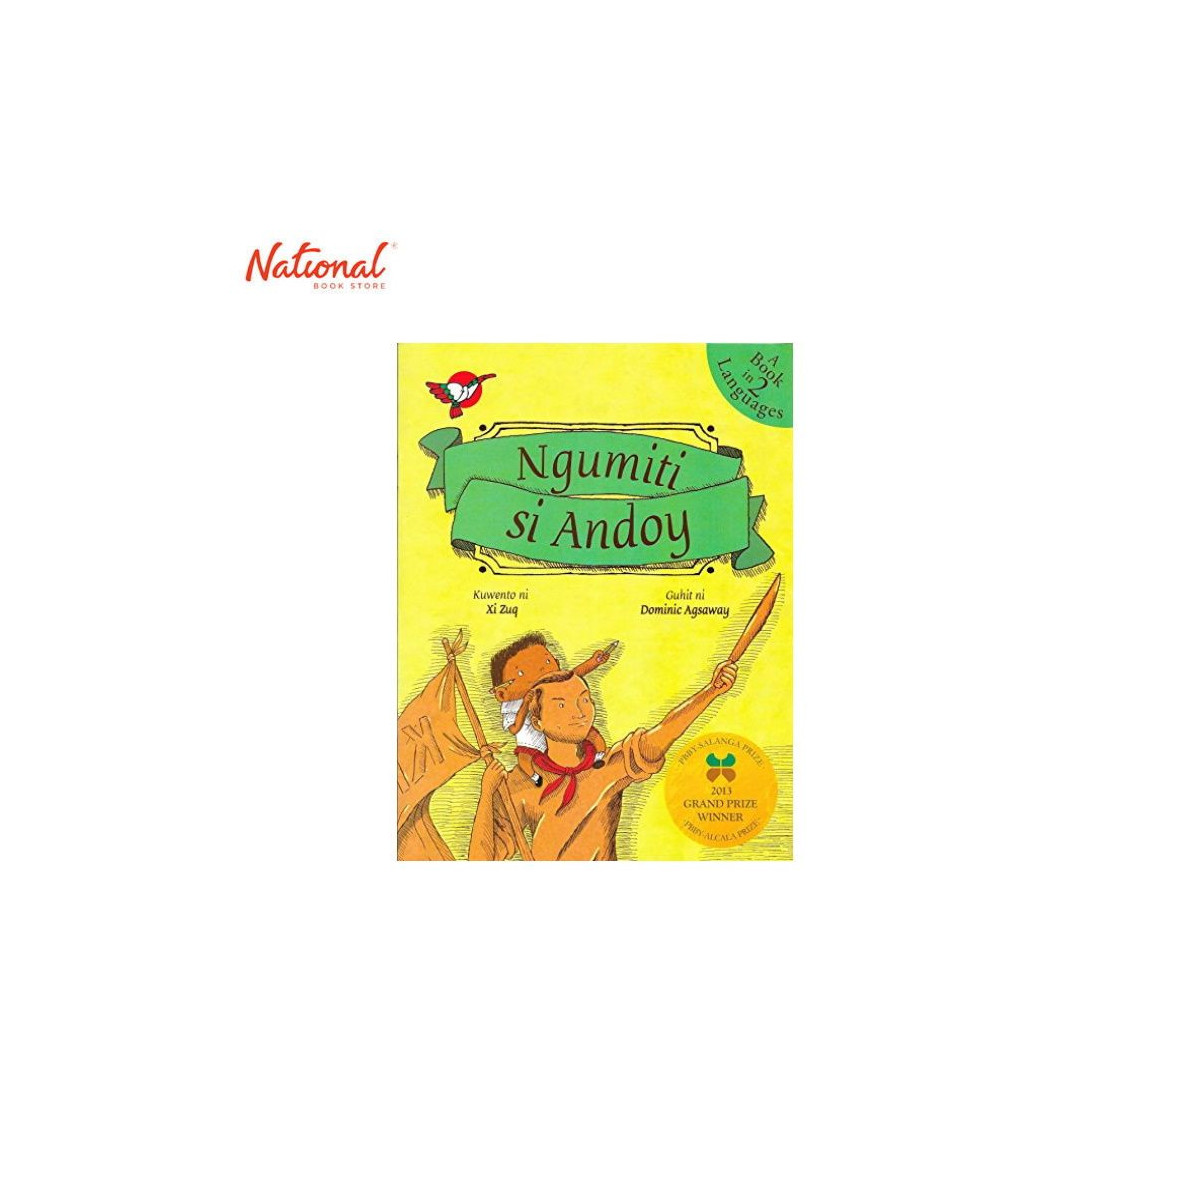 Ngumiti Si Andoy Trade Paperback by Xi Zuq - Books for Kids - Adarna House